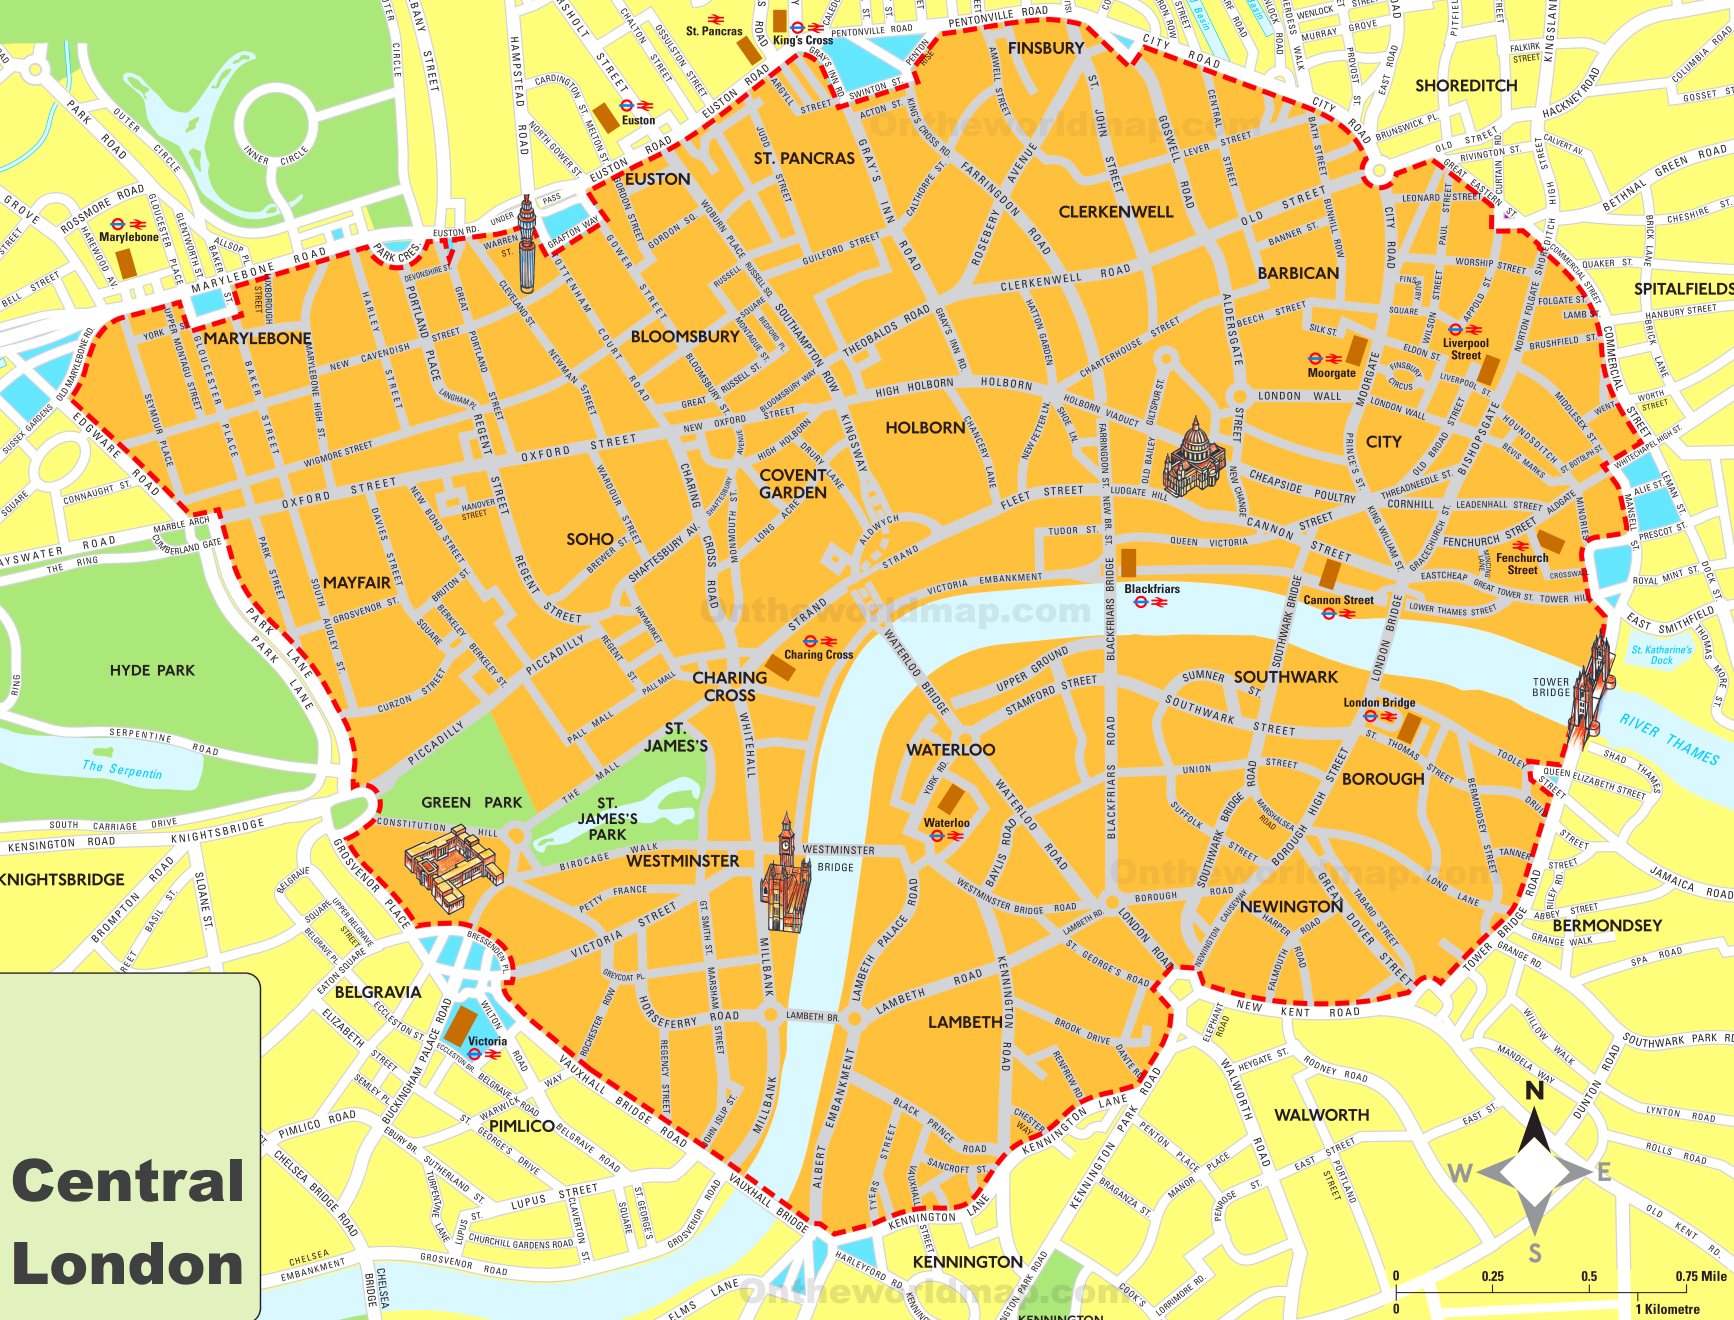 Where is central london located – Hillcotel